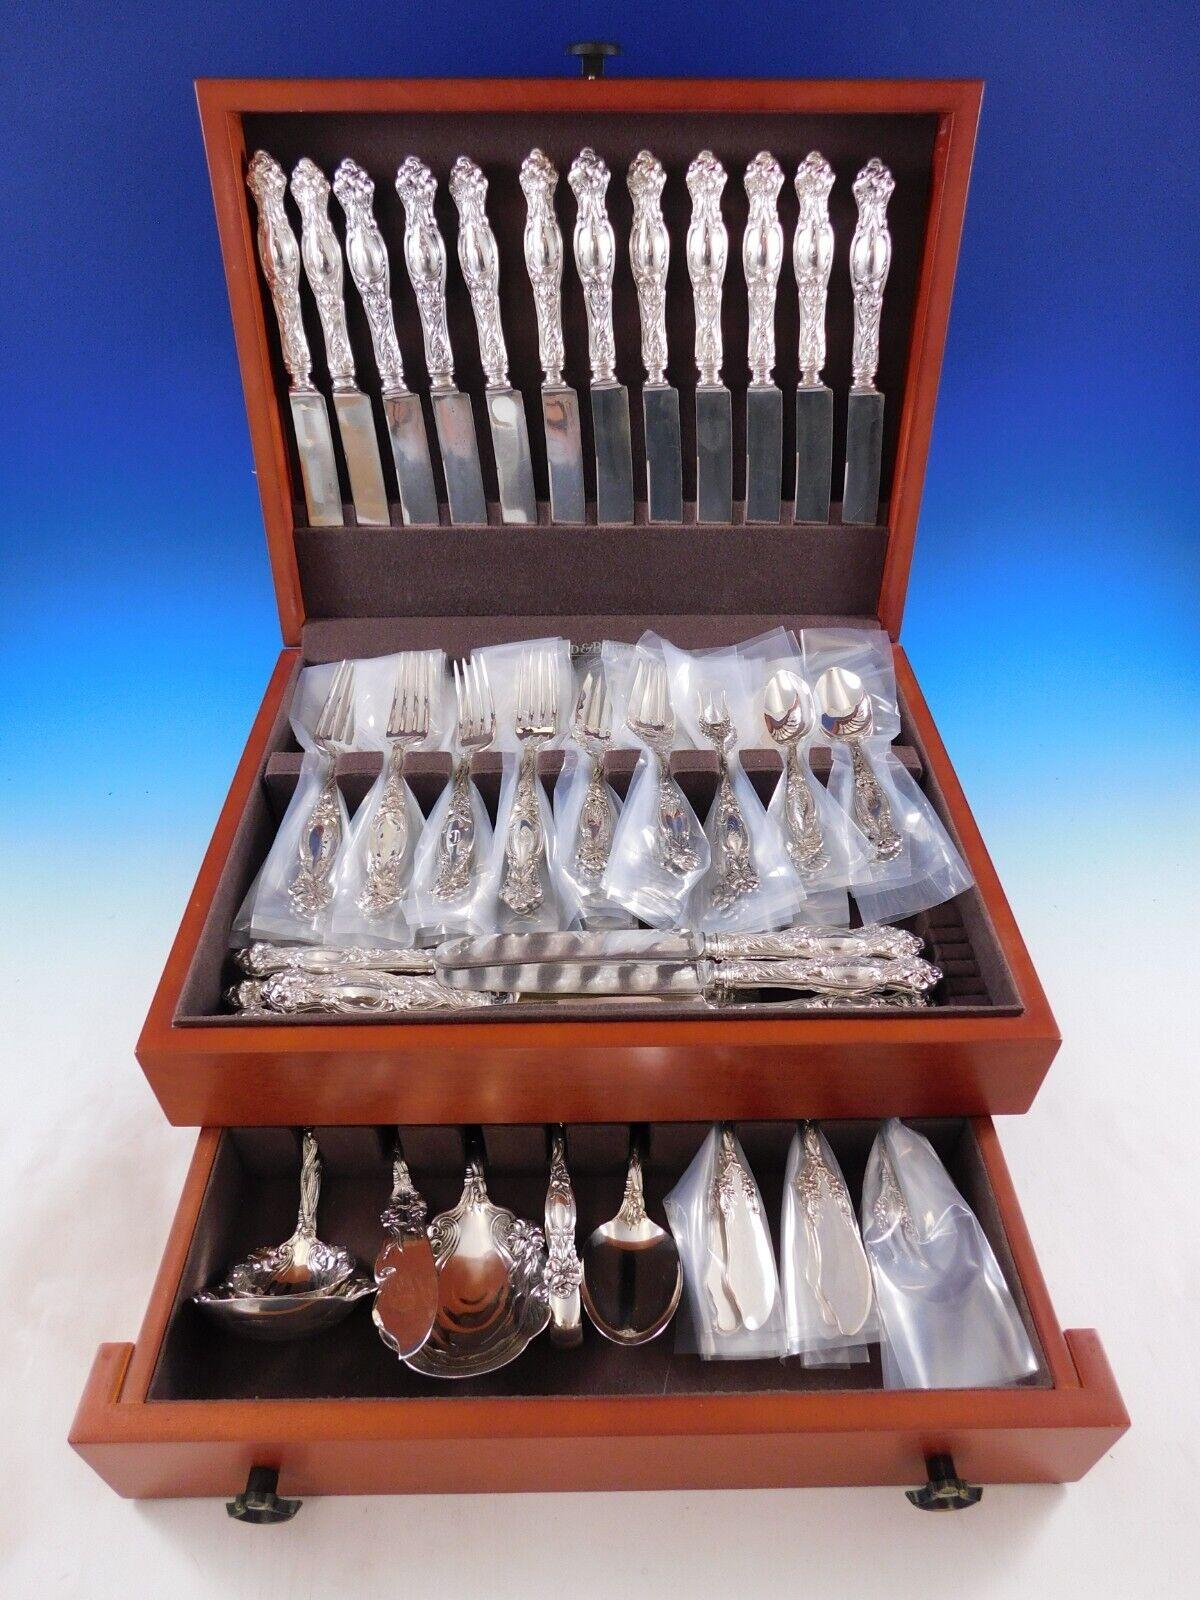 Gorgeous Dinner & Luncheon Size Fontaine by International sterling silver Flatware set - 102 pieces. This set includes:

12 Dinner Size Knives, 9 5/8